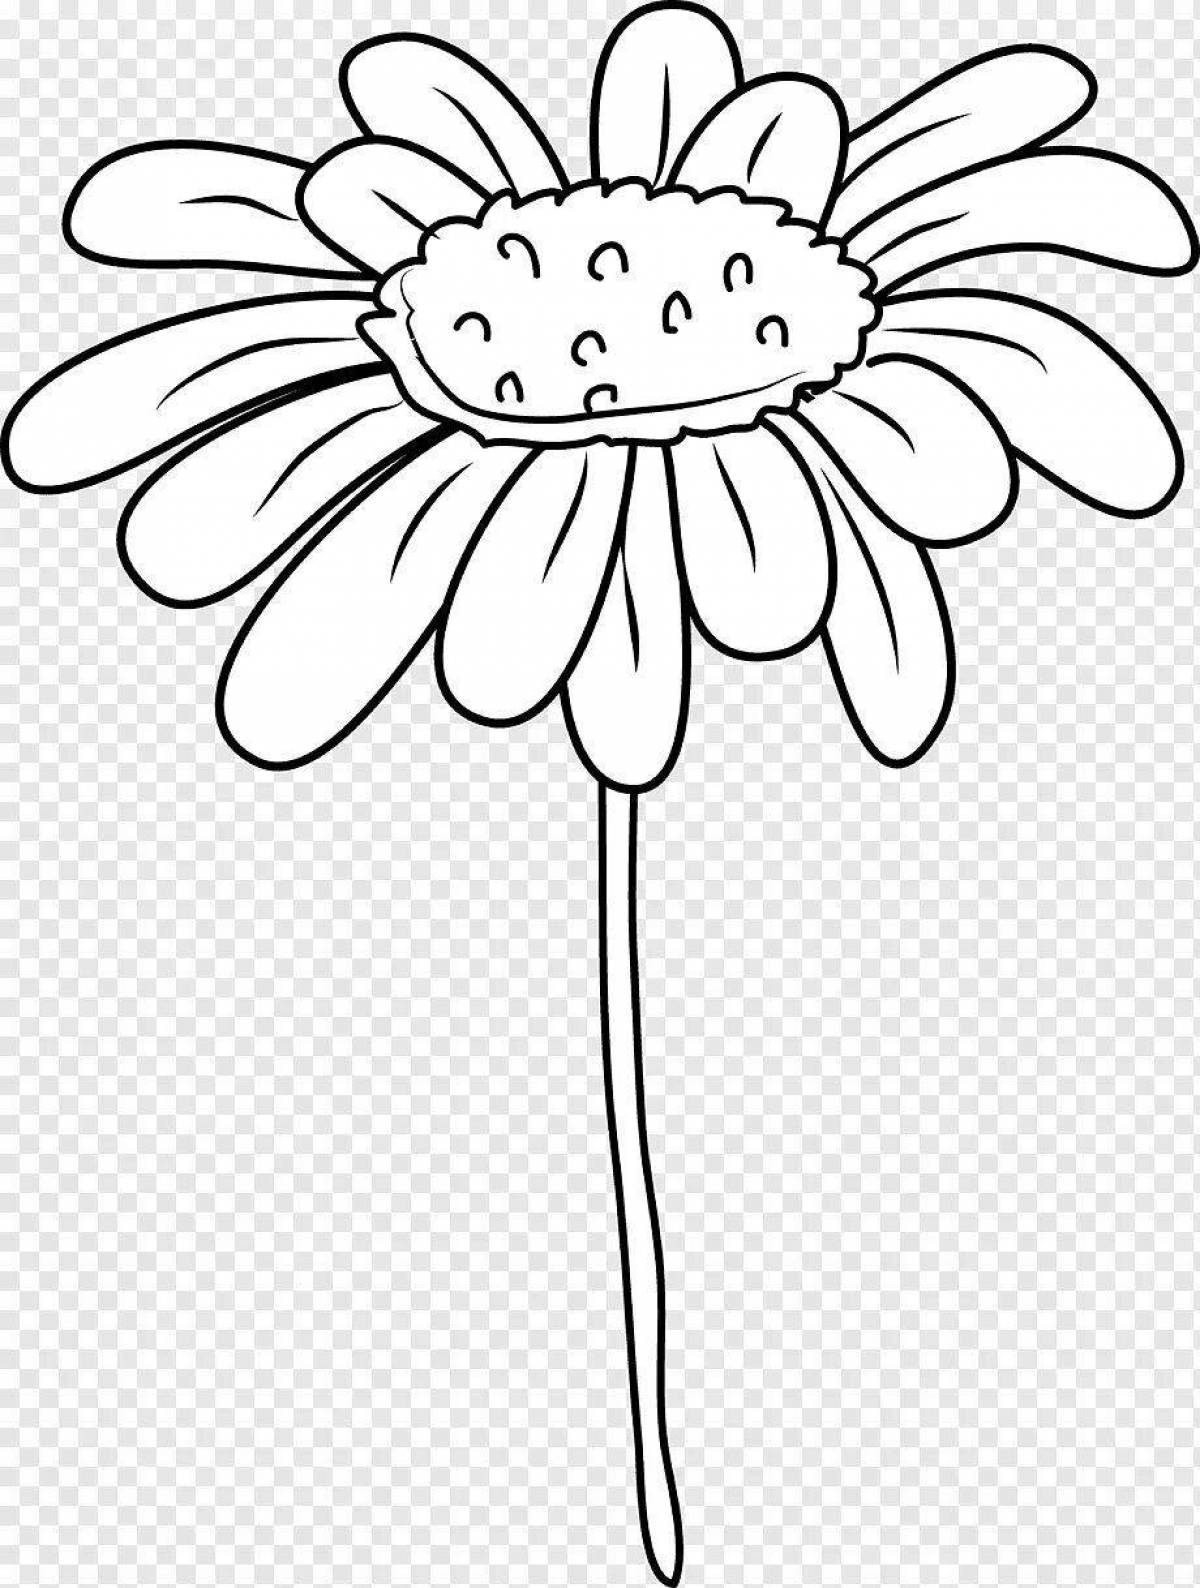 Playful chamomile coloring page